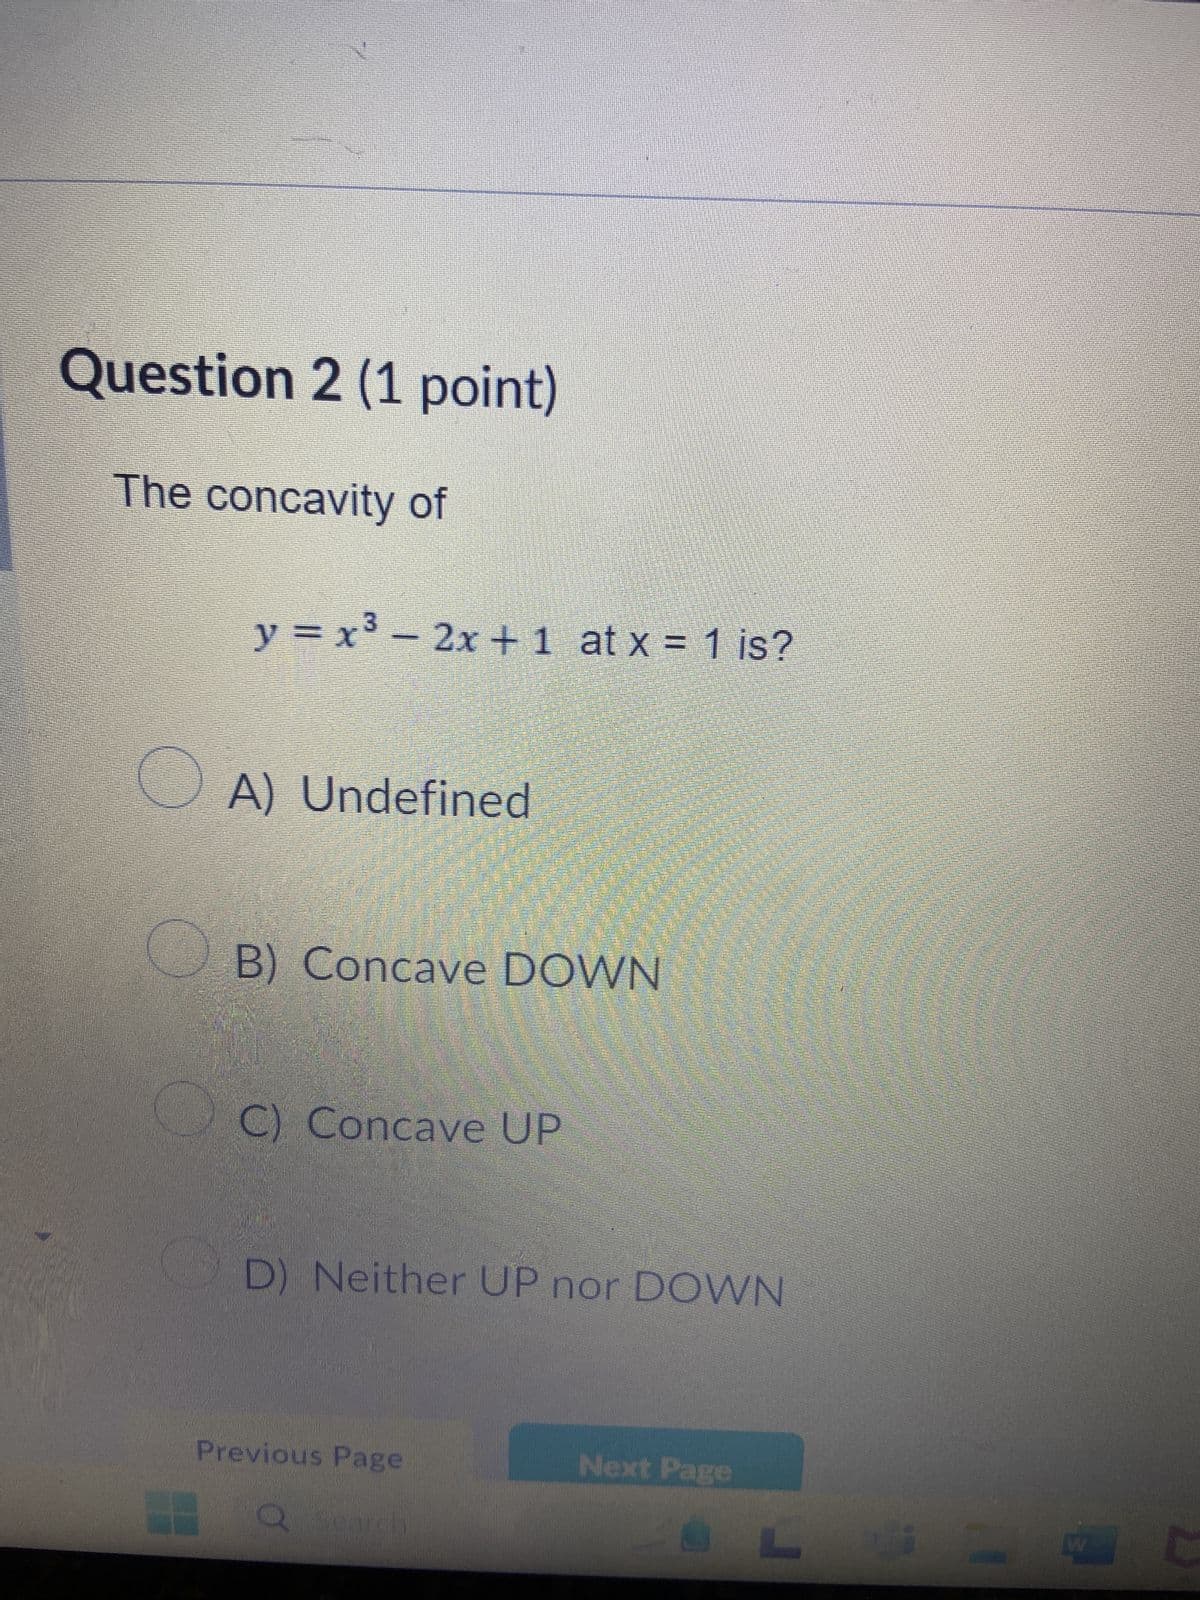 Question 2 (1 point)
The concavity of
y = x³ − 2x + 1 at x = 1 is?
A) Undefined
B) Concave DOWN
OC) Concave UP
D) Neither UP nor DOWN
Previous Page
Next Page
W